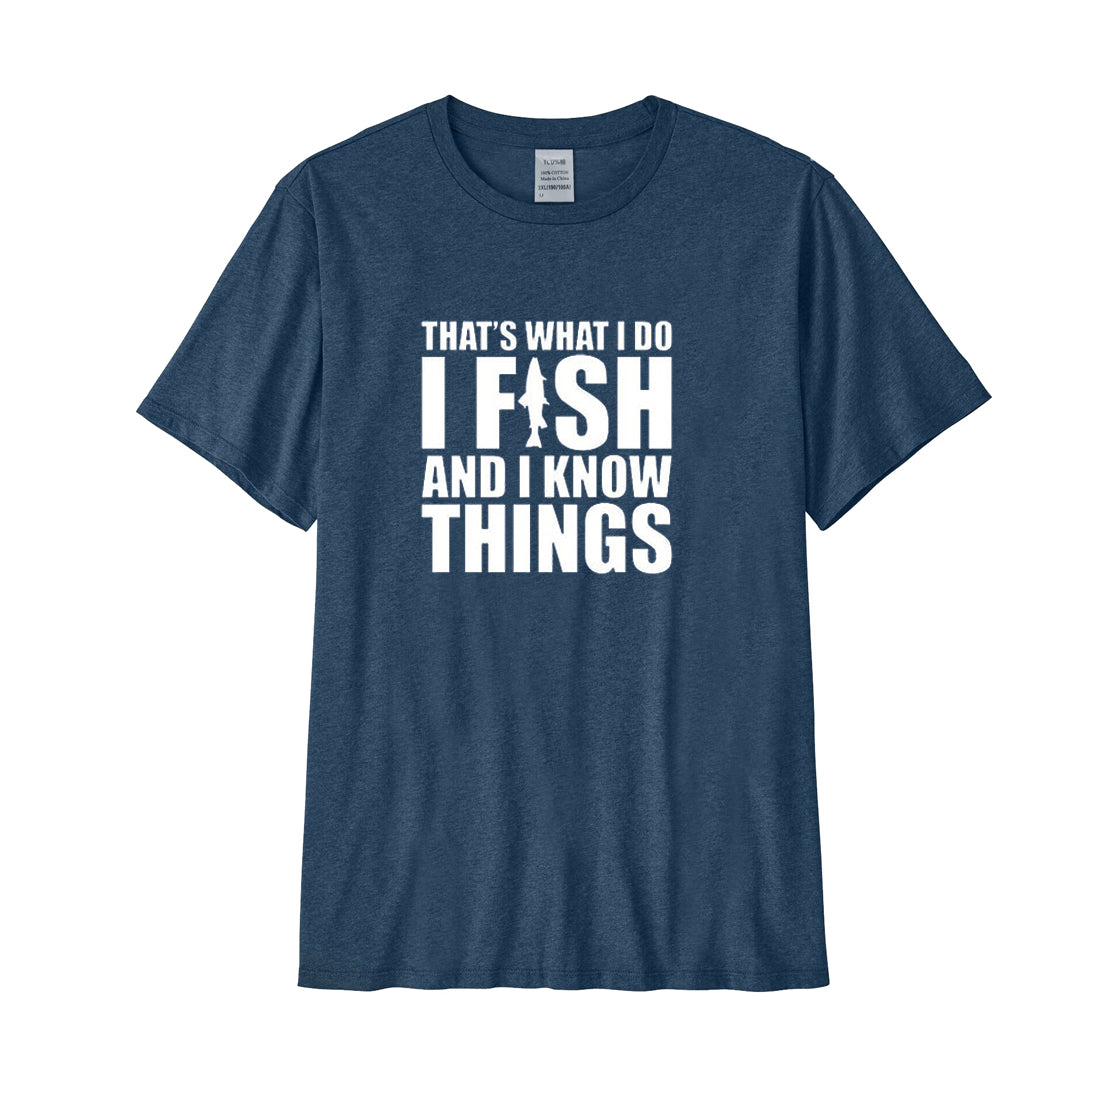 I FISH AND I KNOW THINGS Performance T-Shirt